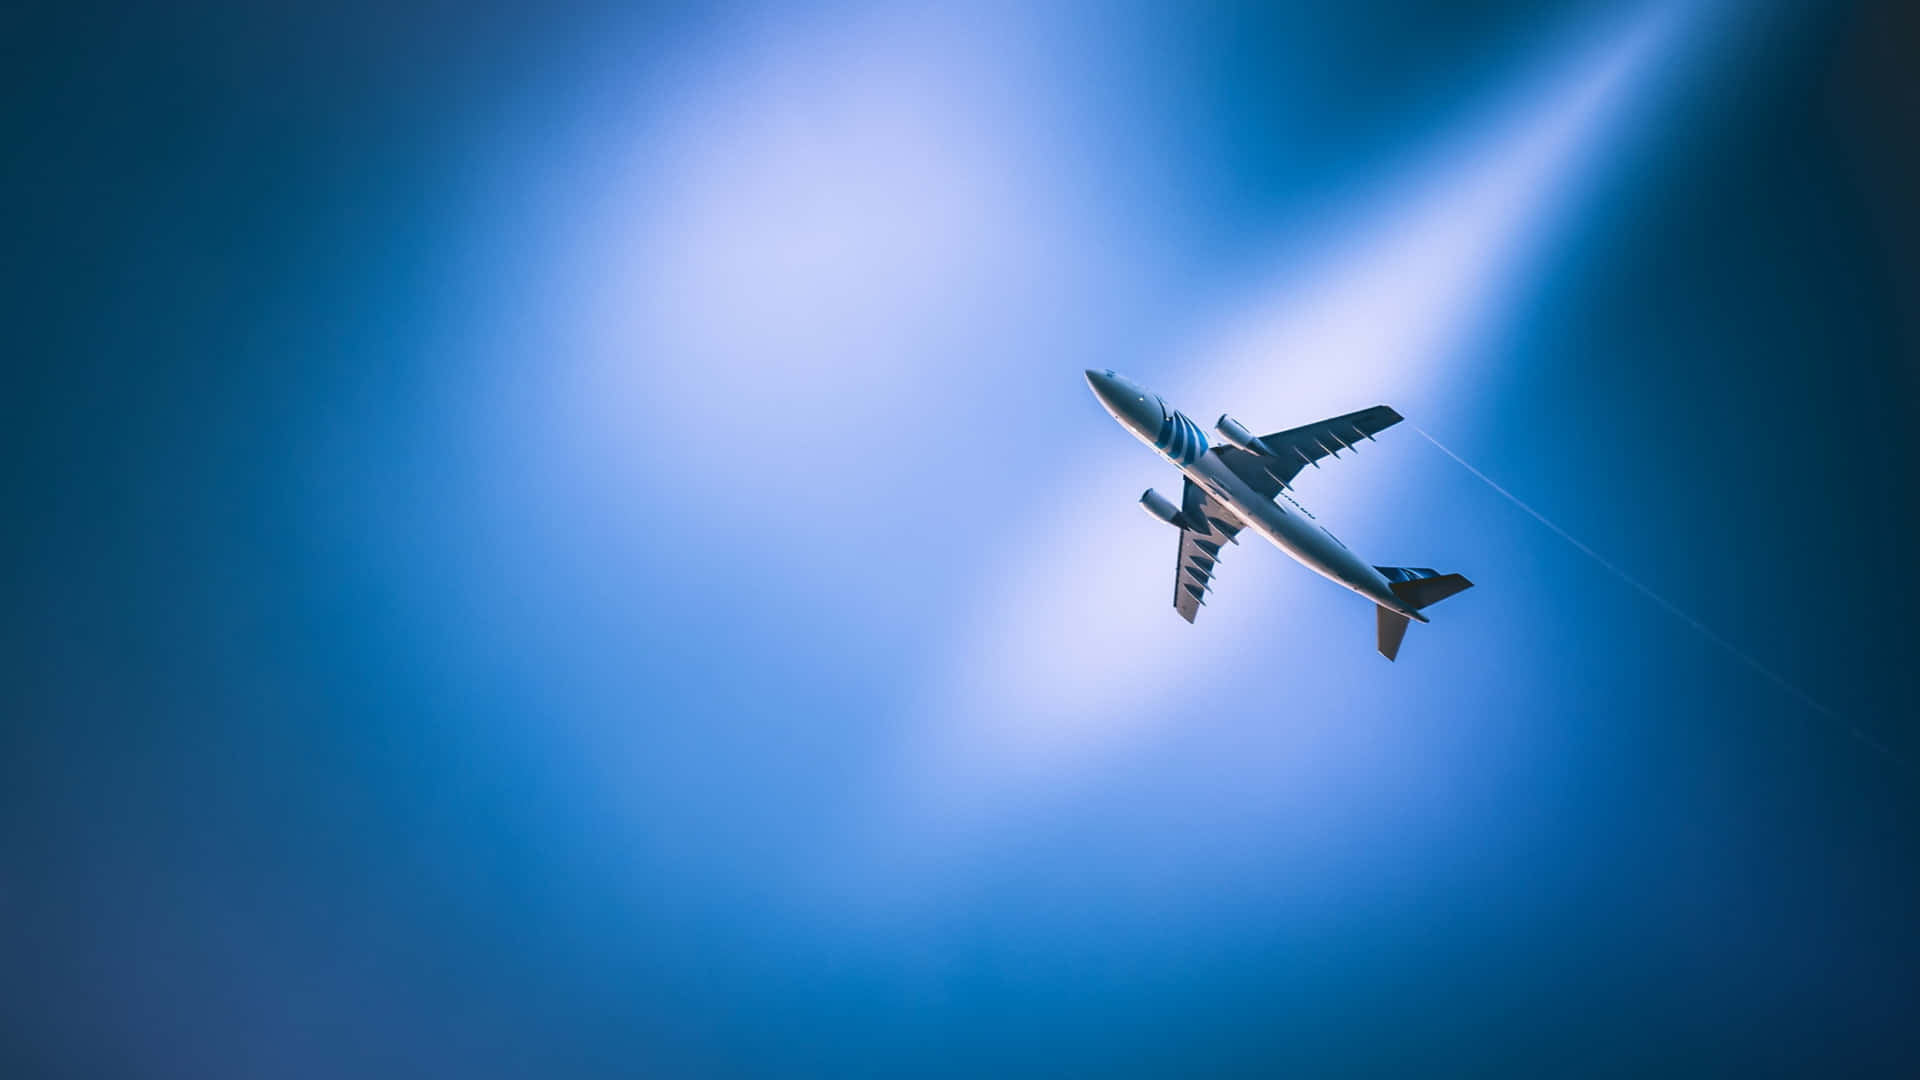 Small Plane Pictures  Download Free Images on Unsplash